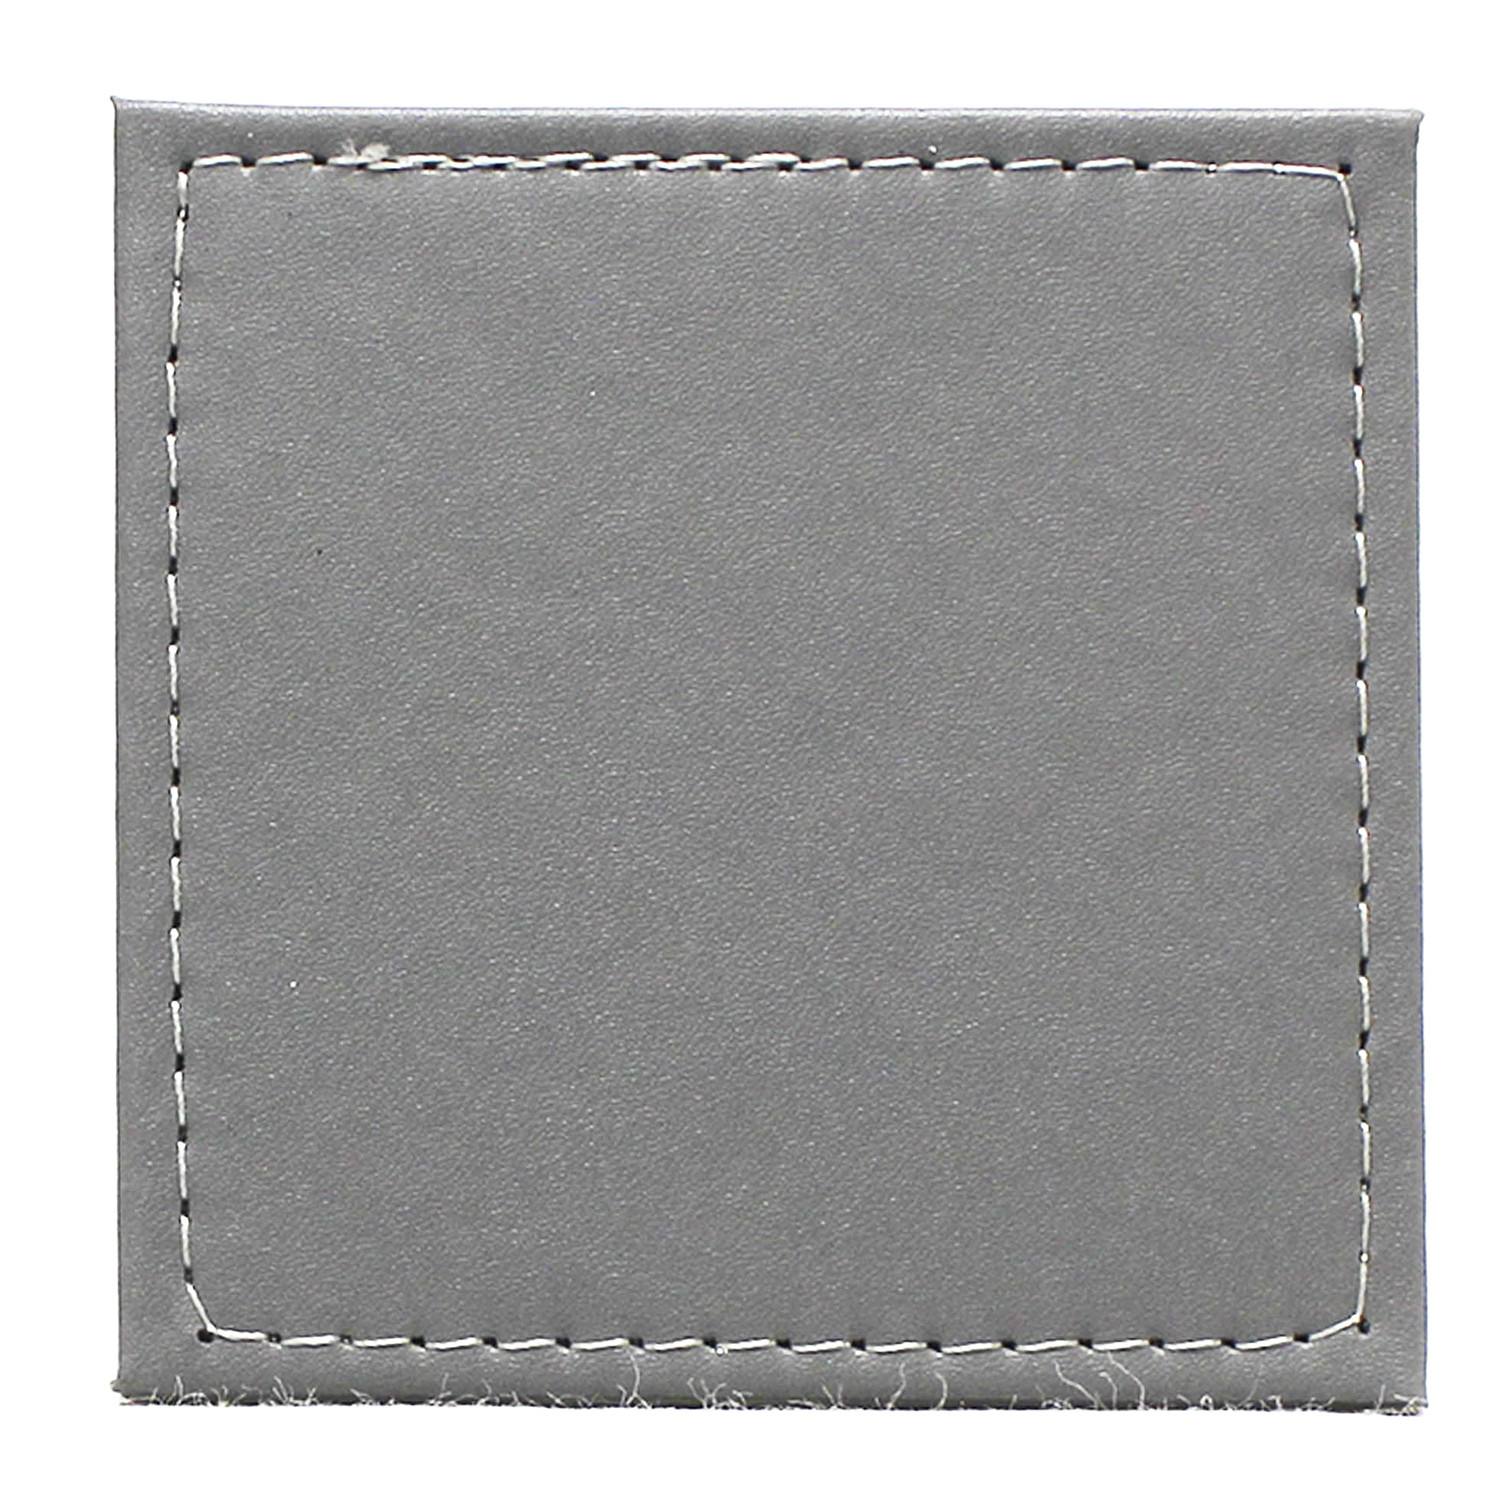 4 Pack Grey Faux Leather Coaster Image